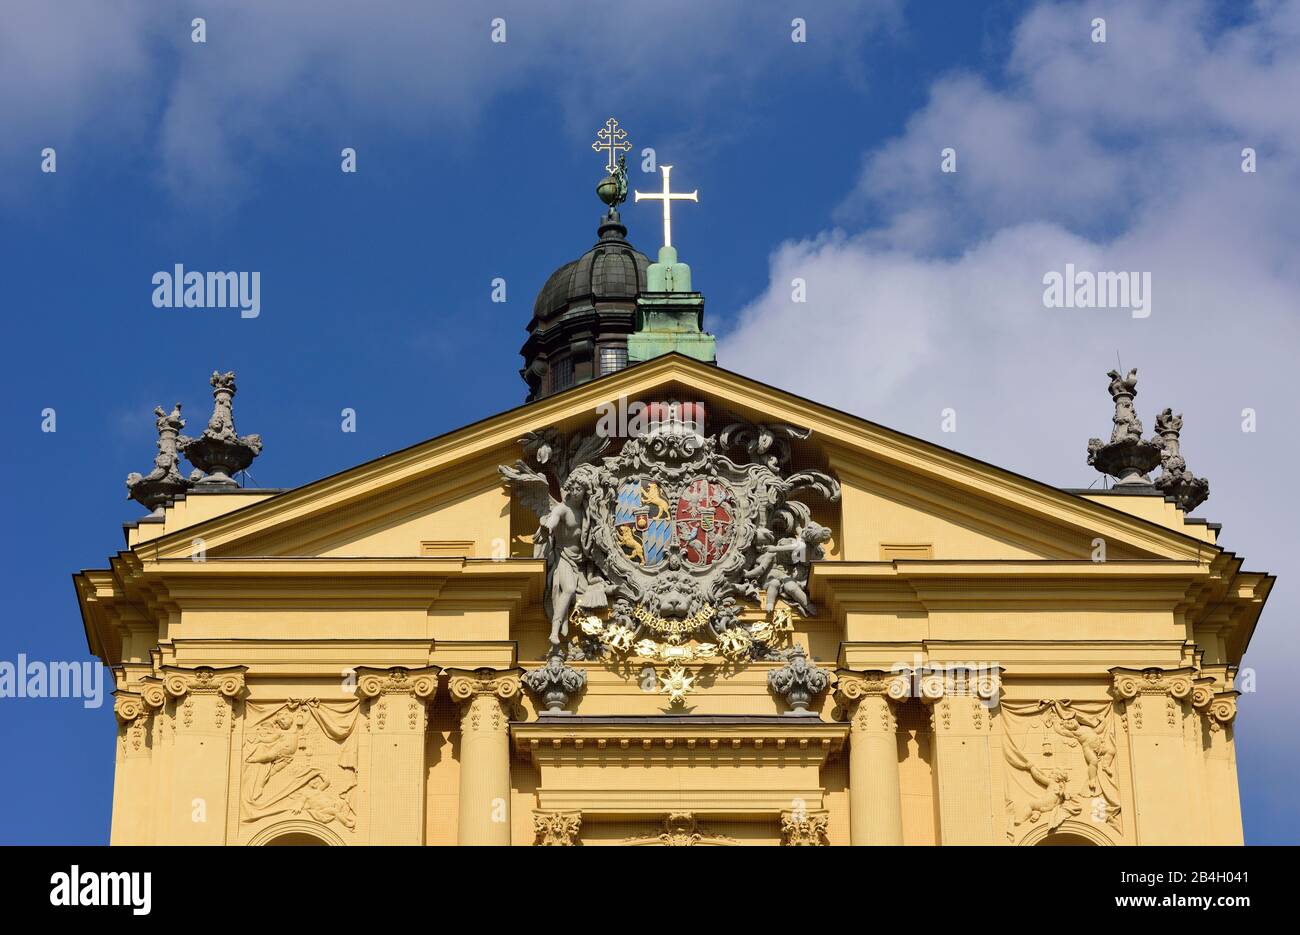 Europe, Germany, Bavaria, Munich, Odeonsplatz, Theatinerkirche from 1663, St. Cajetan, founder of the Theatinerordens, gables, figurine jewelry and coats of arms, Stock Photo